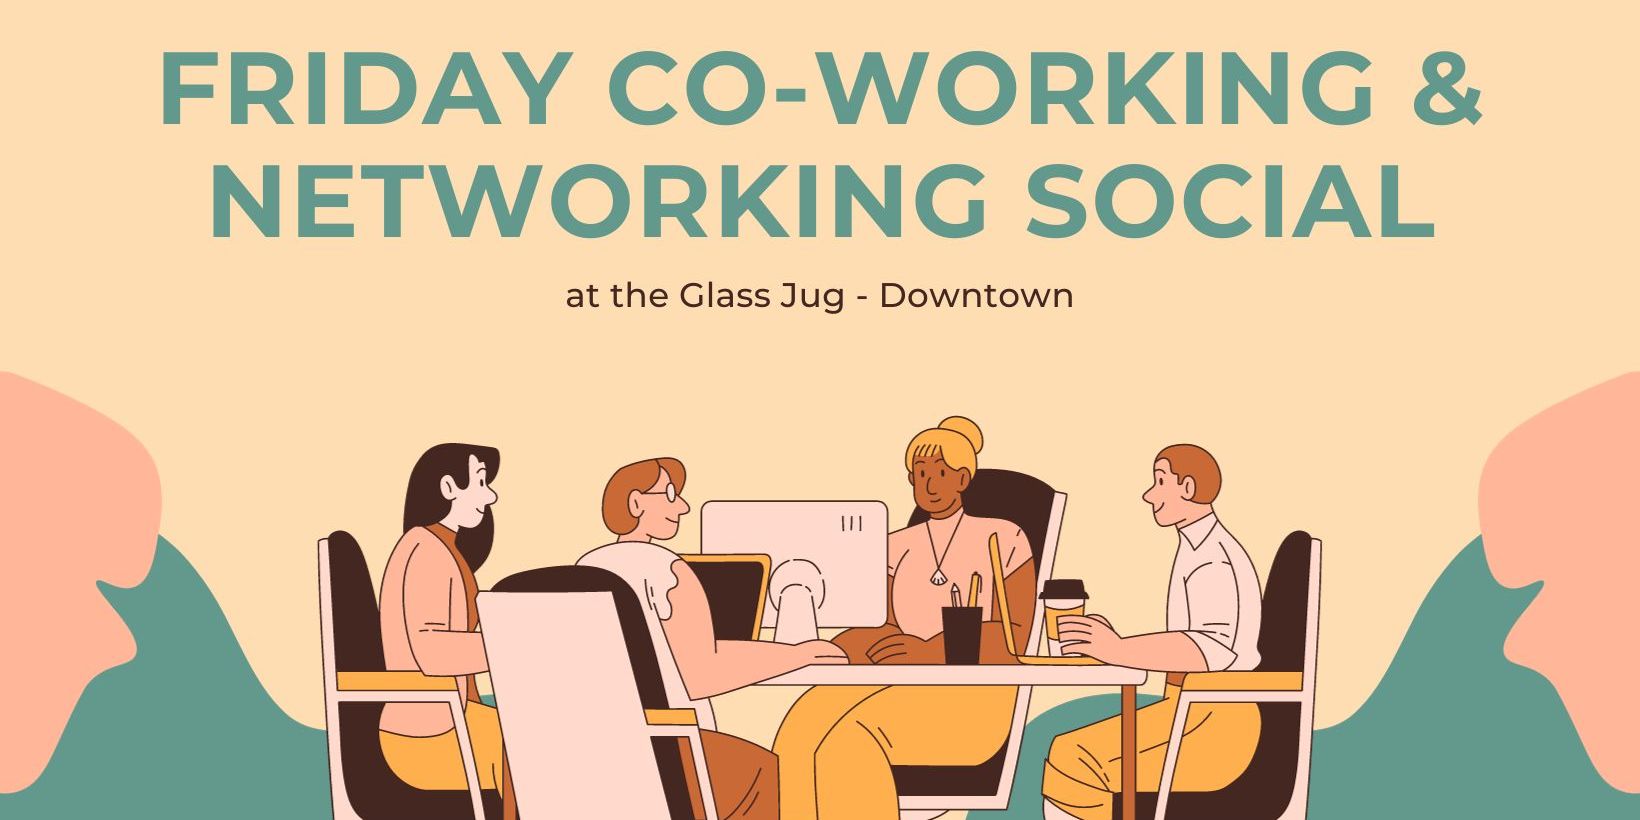 Friday Co-Working & Networking Social promotional image